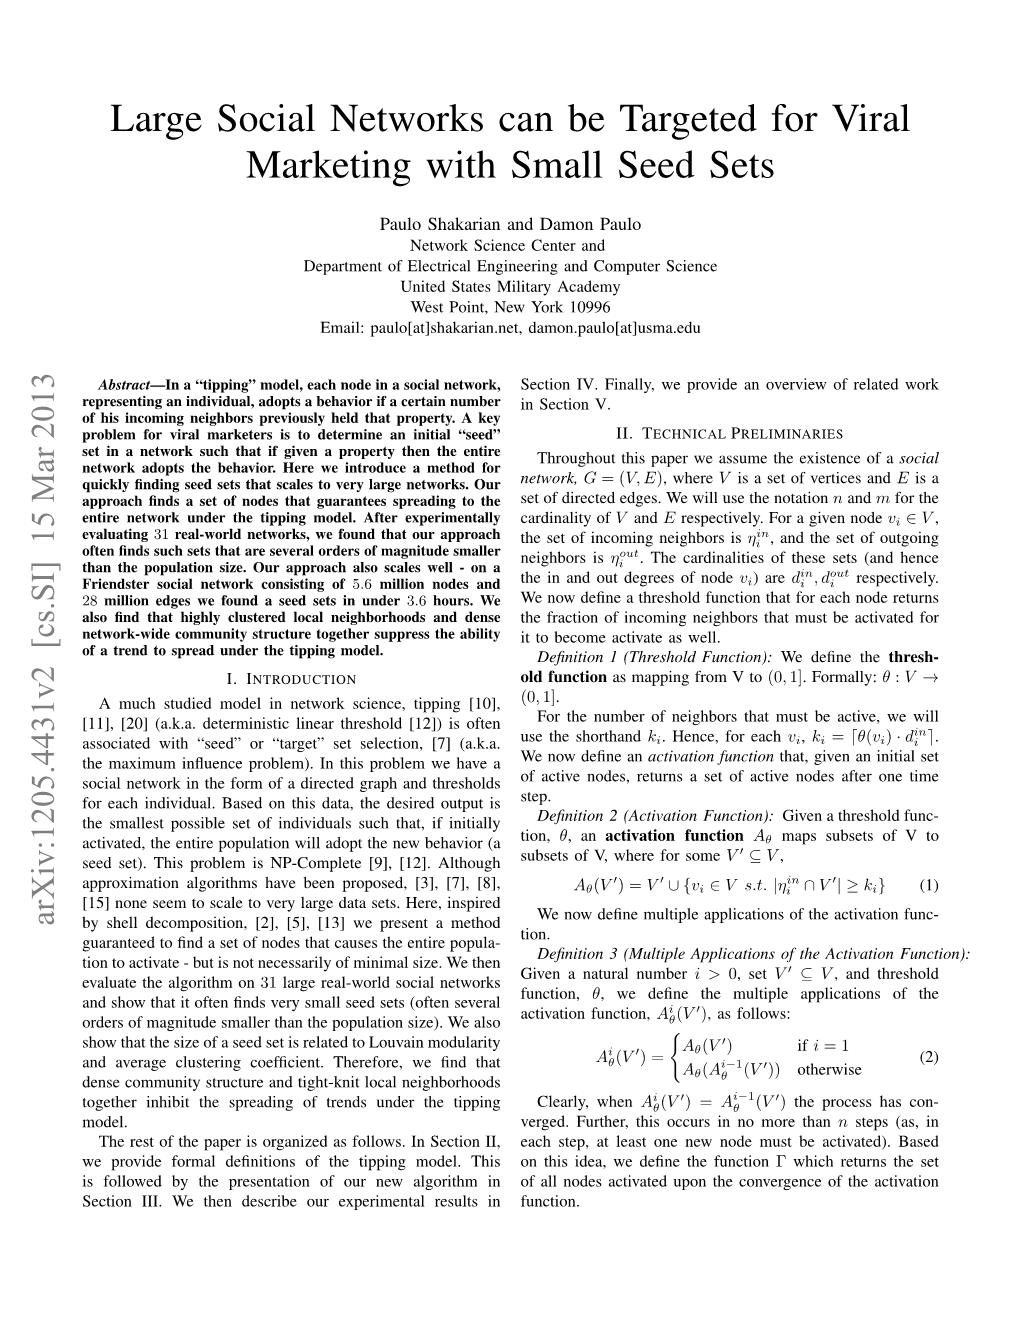 Large Social Networks Can Be Targeted for Viral Marketing with Small Seed Sets